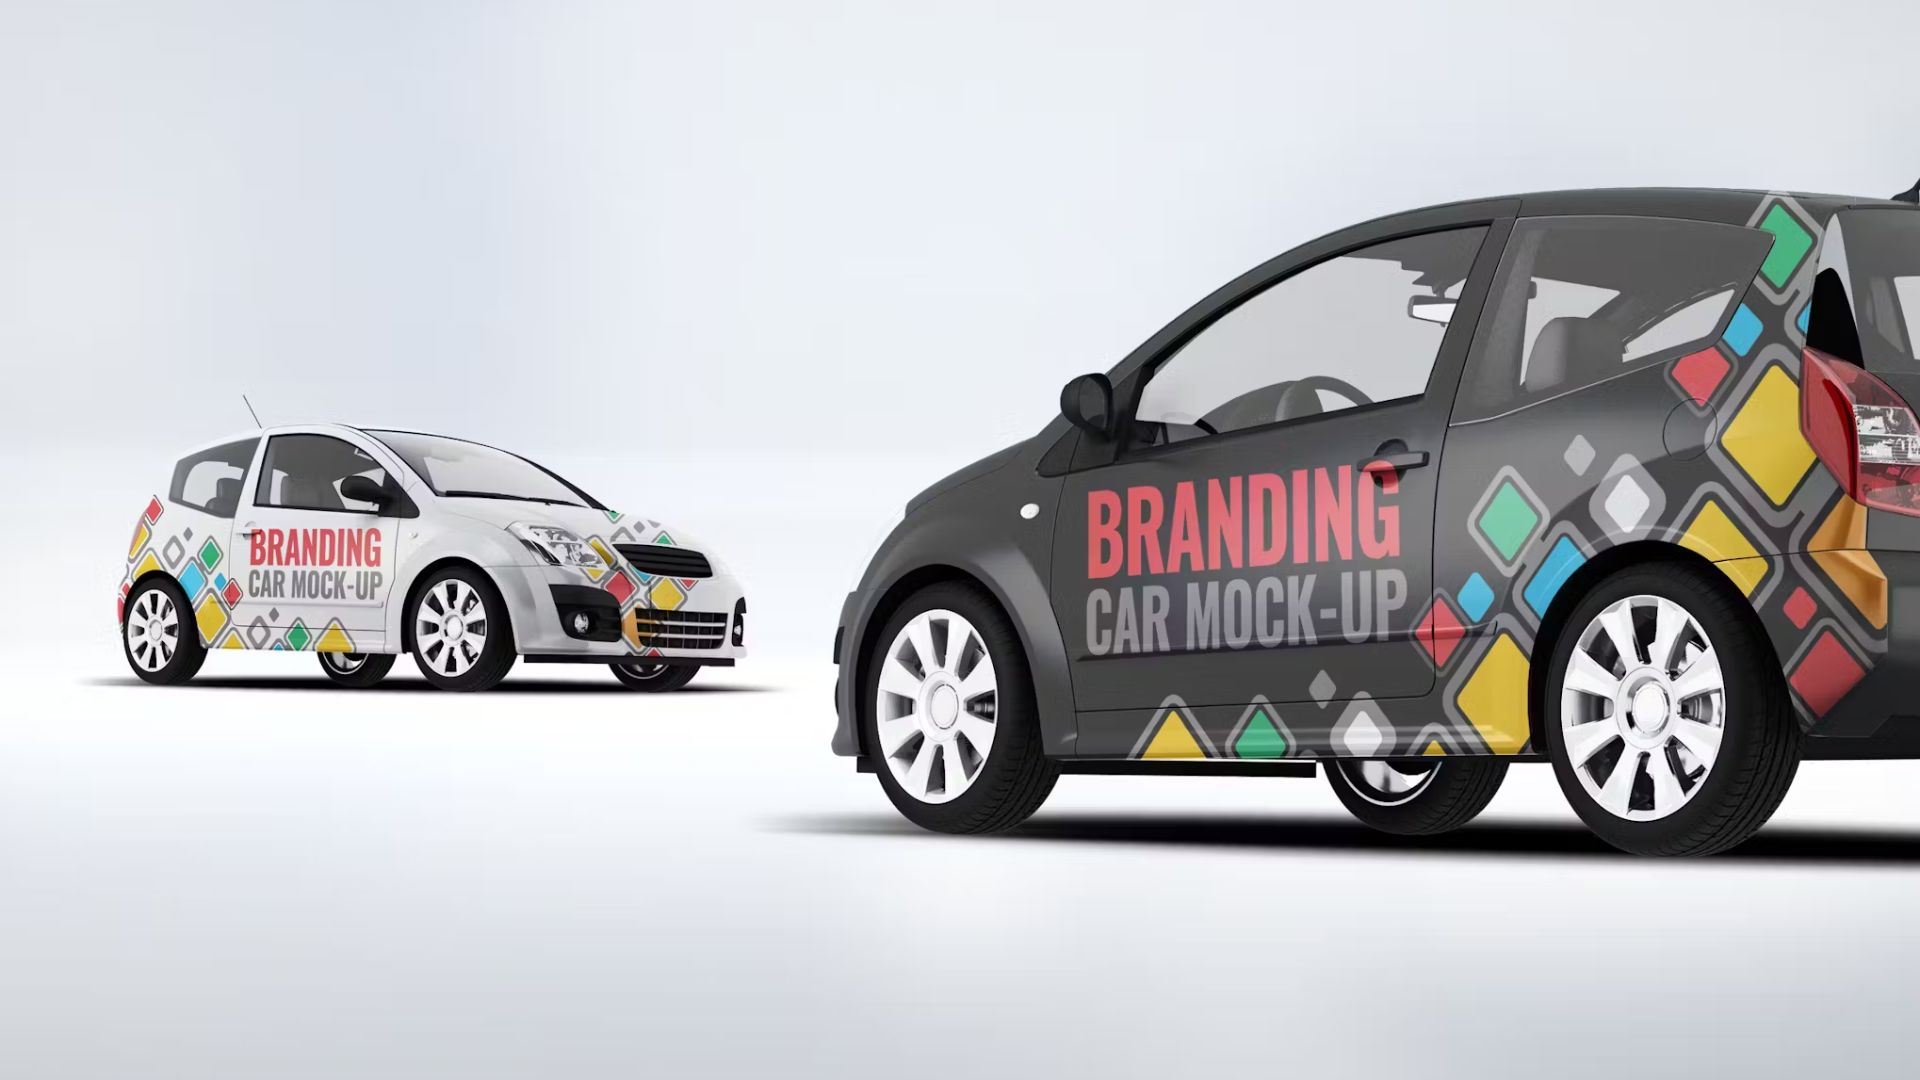 Is Car Branding a Cost-Effective Advertising Strategy